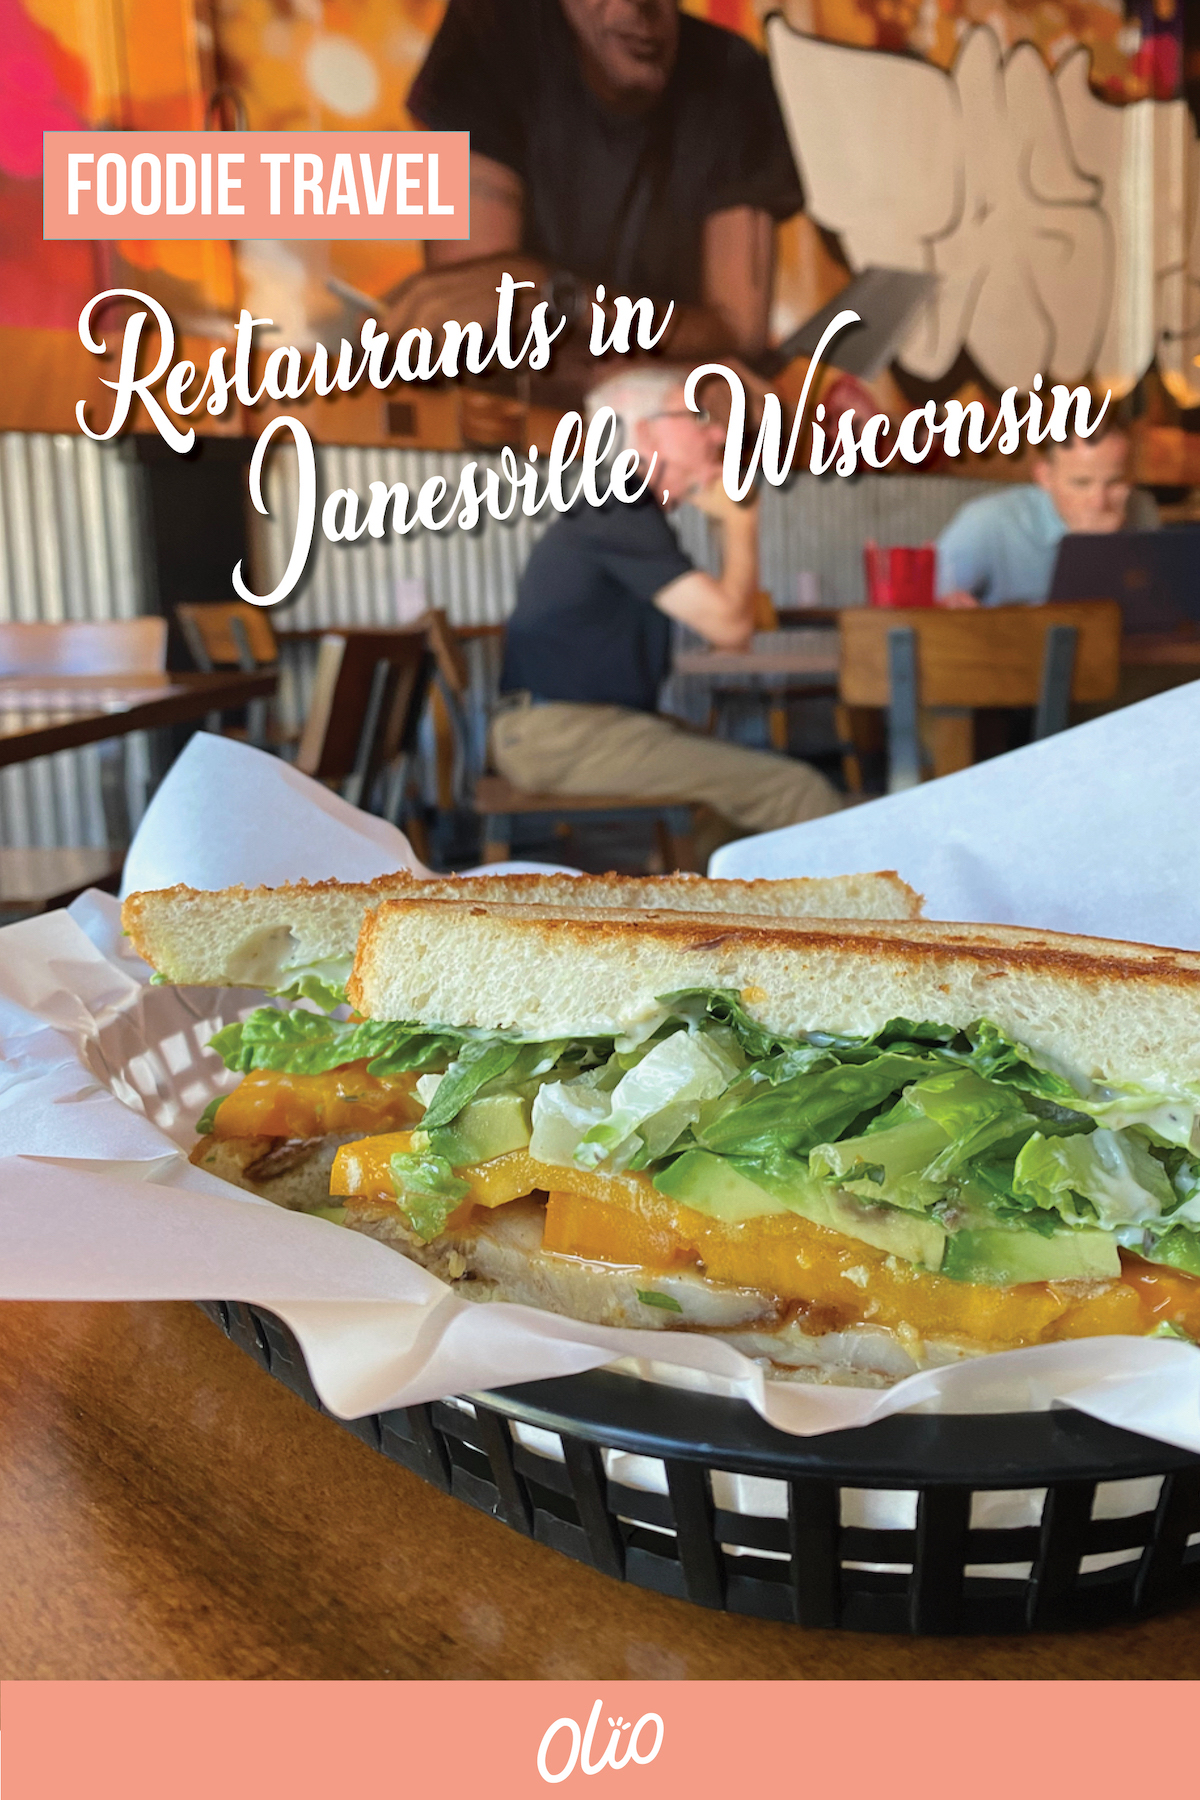 When visiting Wisconsin, there's nothing better than the classics—beer and cheese! Discover eight incredible places to eat in Janesville, Wisconsin. From classy wine bars to mouthwatering sweet shops, there are lots of delicious spots to discover in this small town. #Wisconsin #FoodieFinds